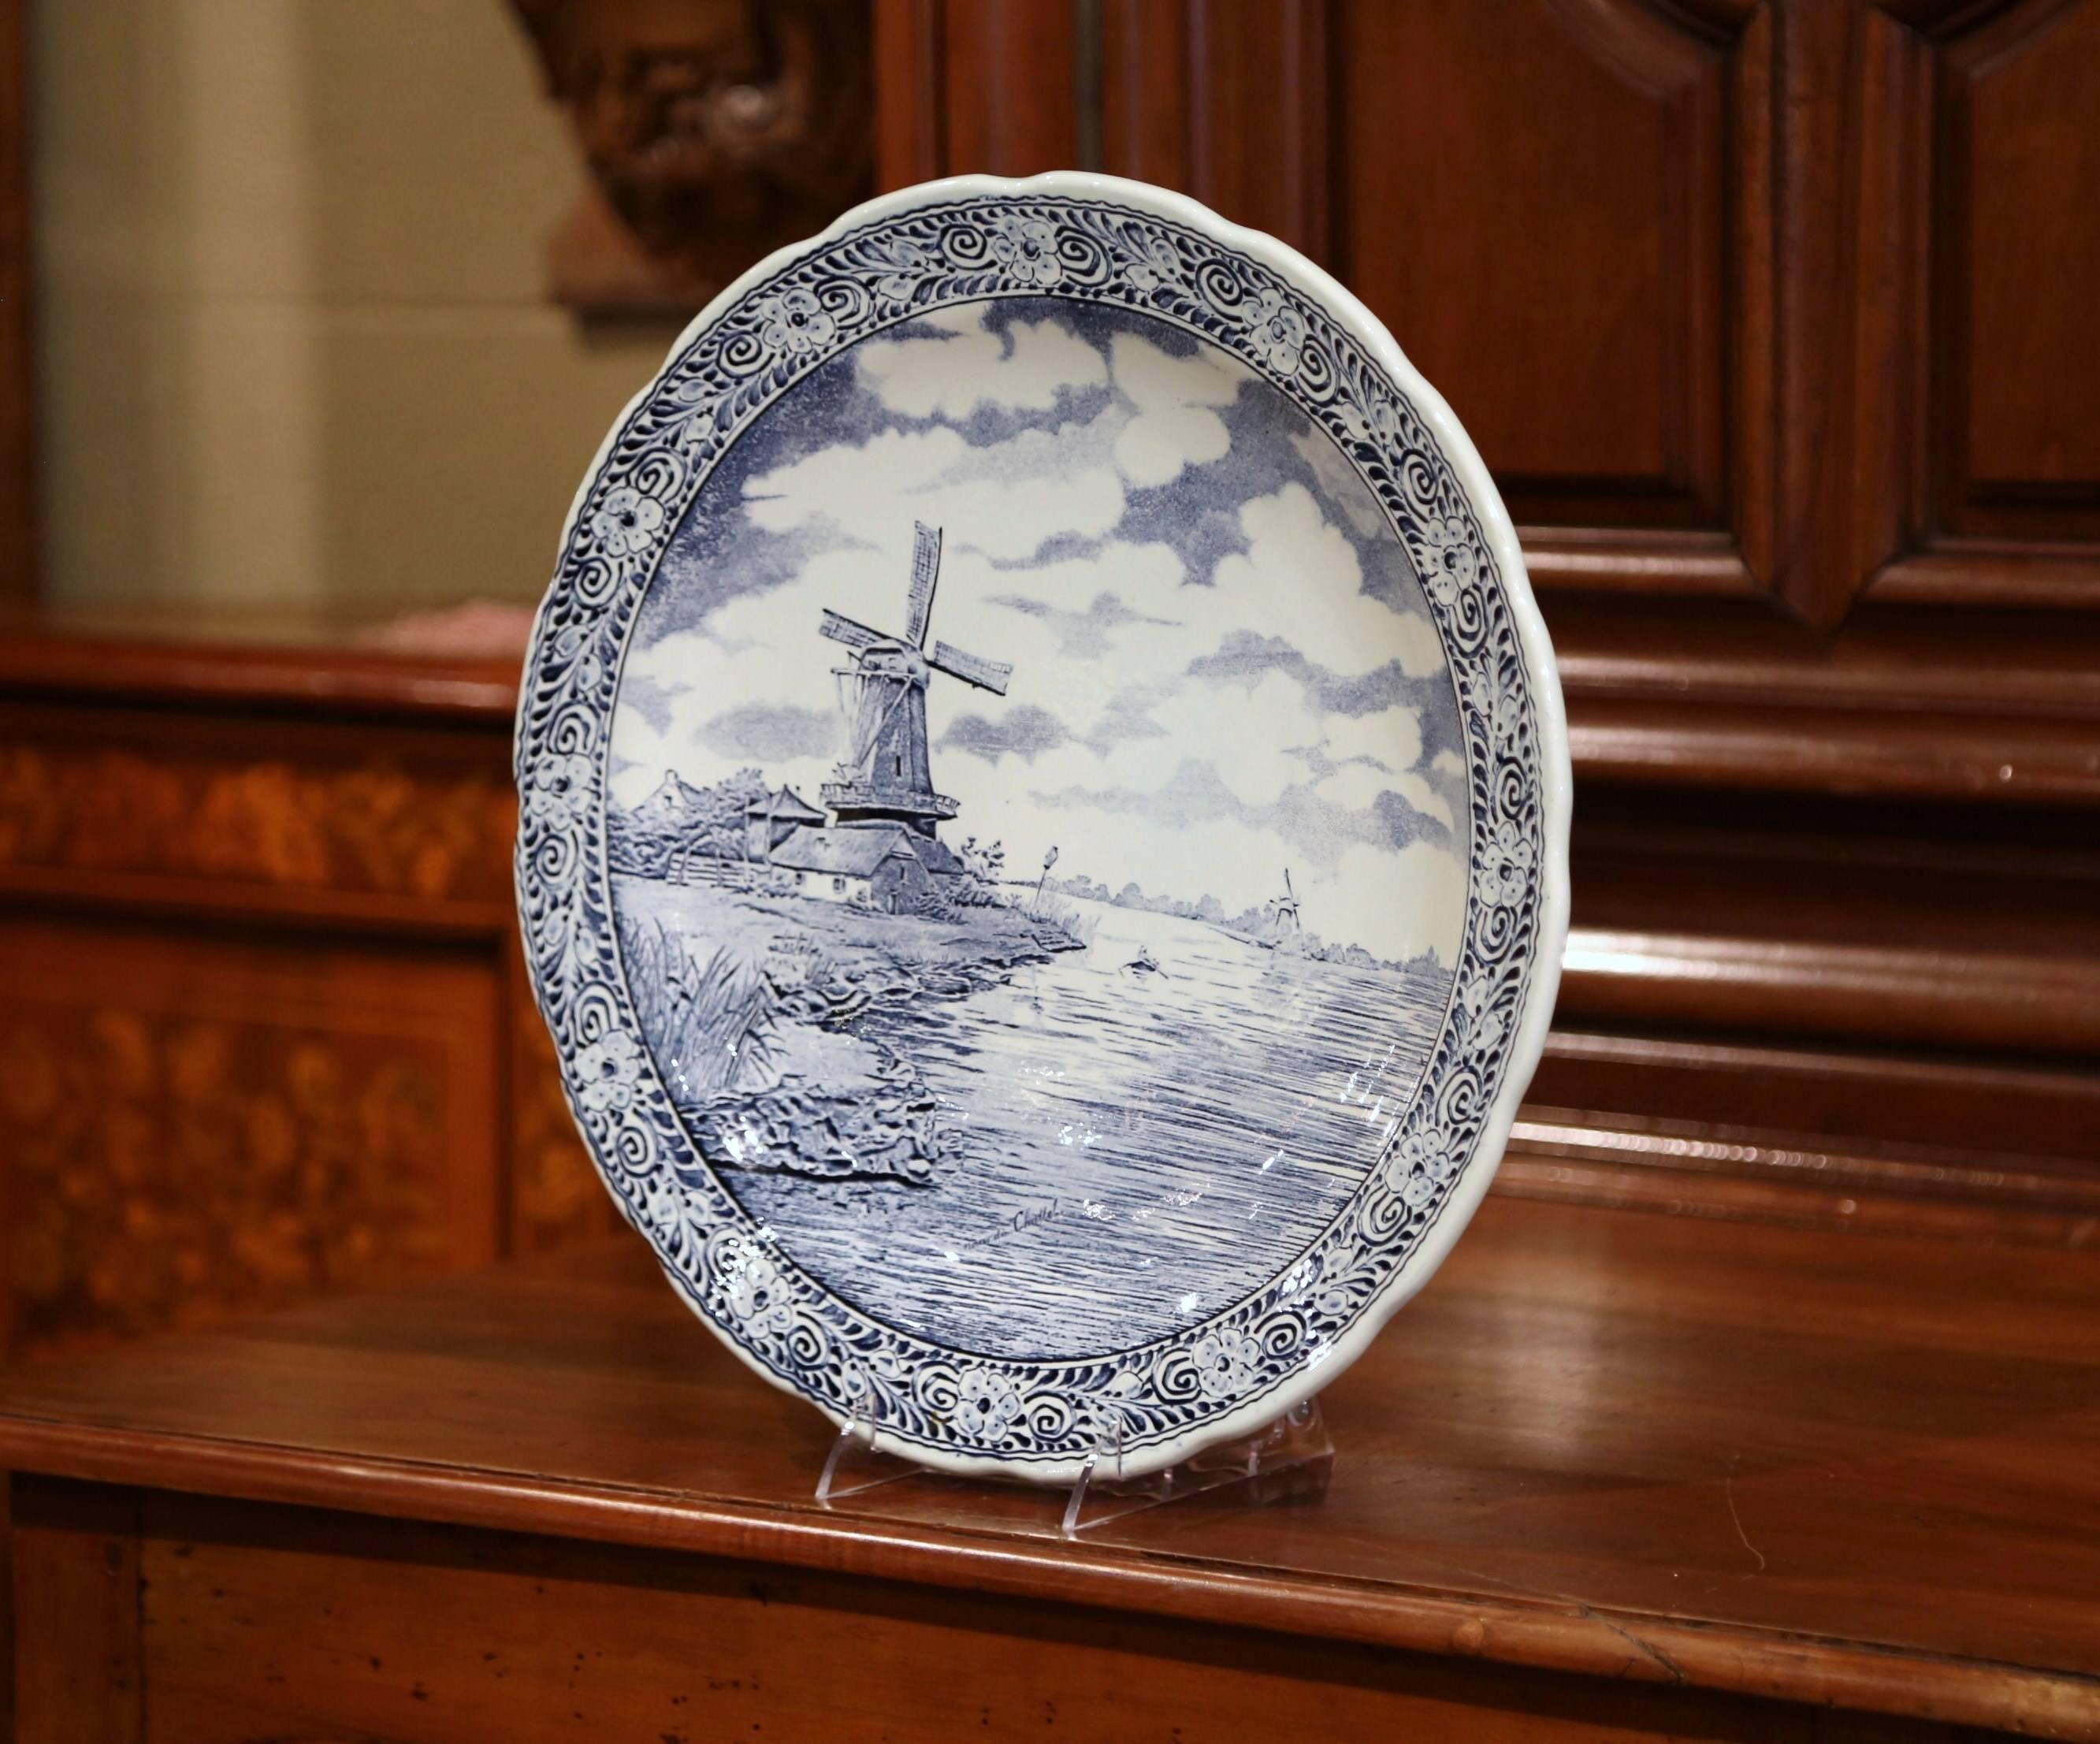 This large antique platter was crafted in Holland, circa 1920. The large, wall hanging plate depicts a lake scene with a traditional Dutch windmill in the Classic blue and white palette. The ceramic piece has a flower border and features a farm